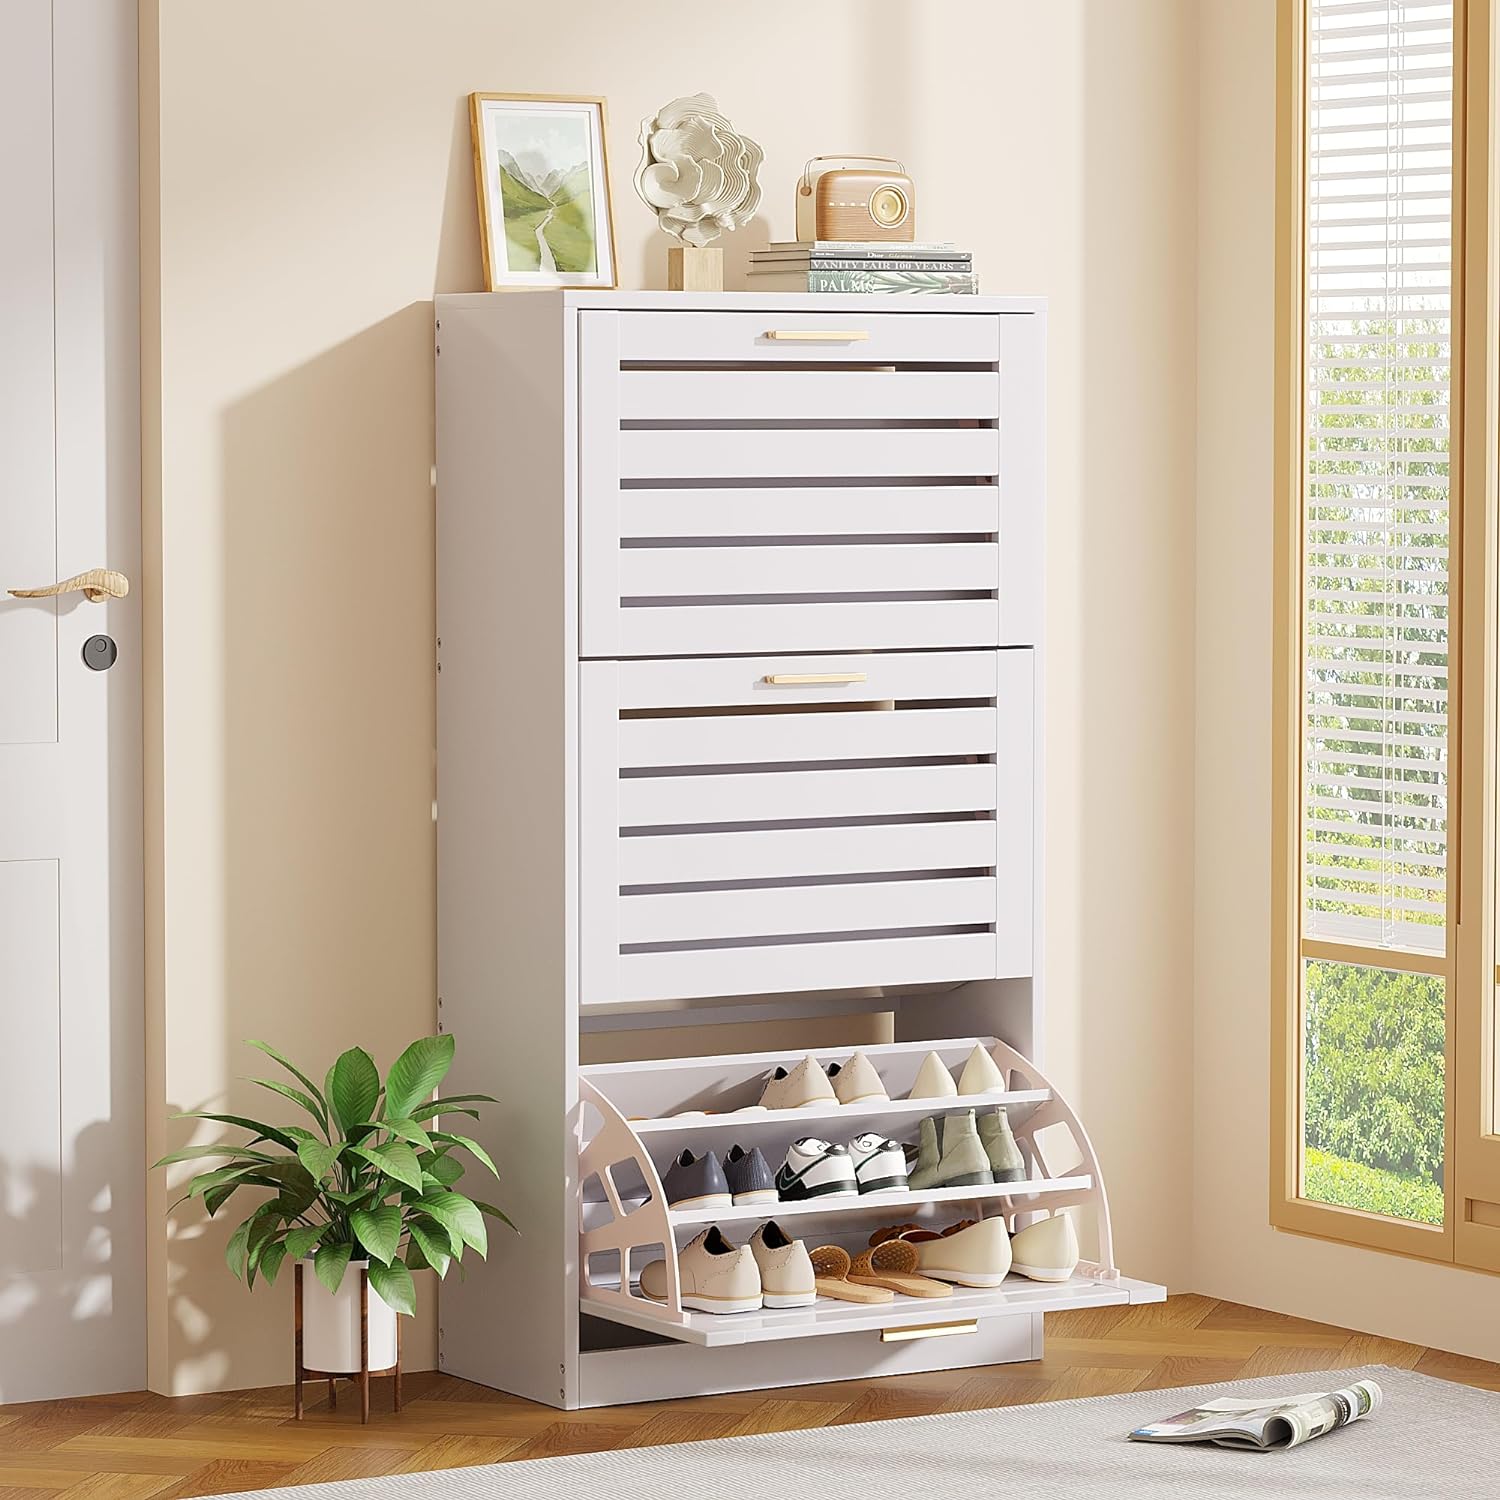 VECELO Shoe Cabinet Storage for Entryway with 3 Flip Drawers